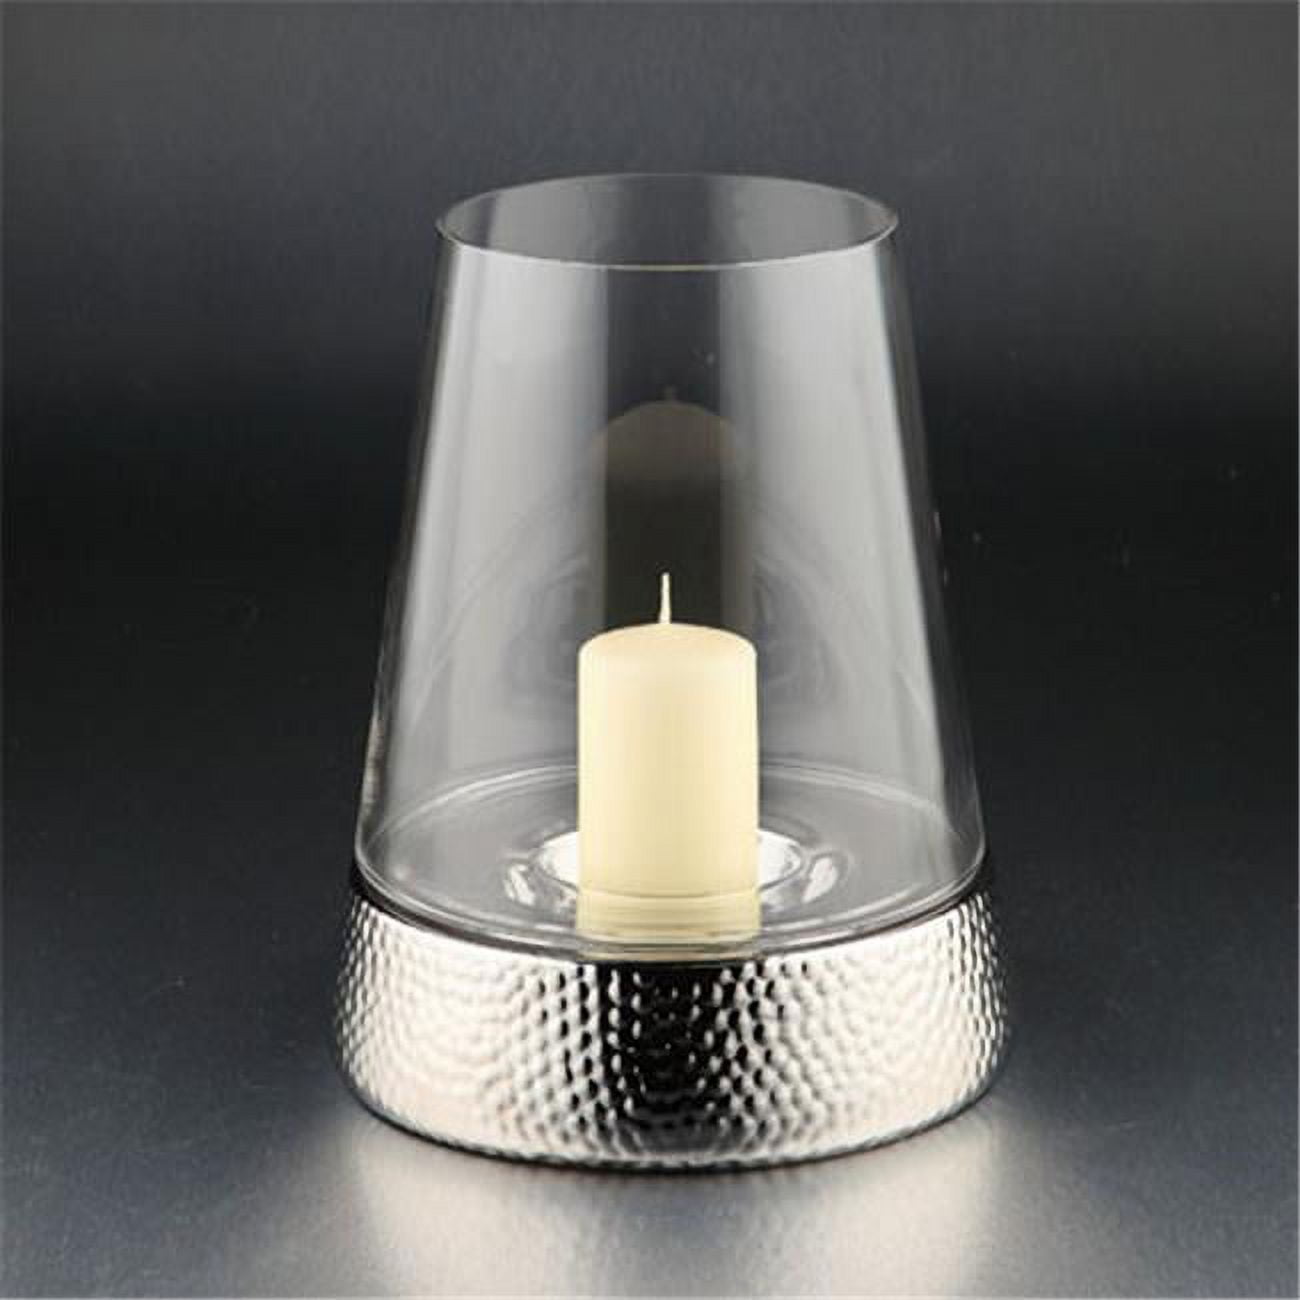 86411 8 X 6 In. Hurricane Candle Holder, Silver